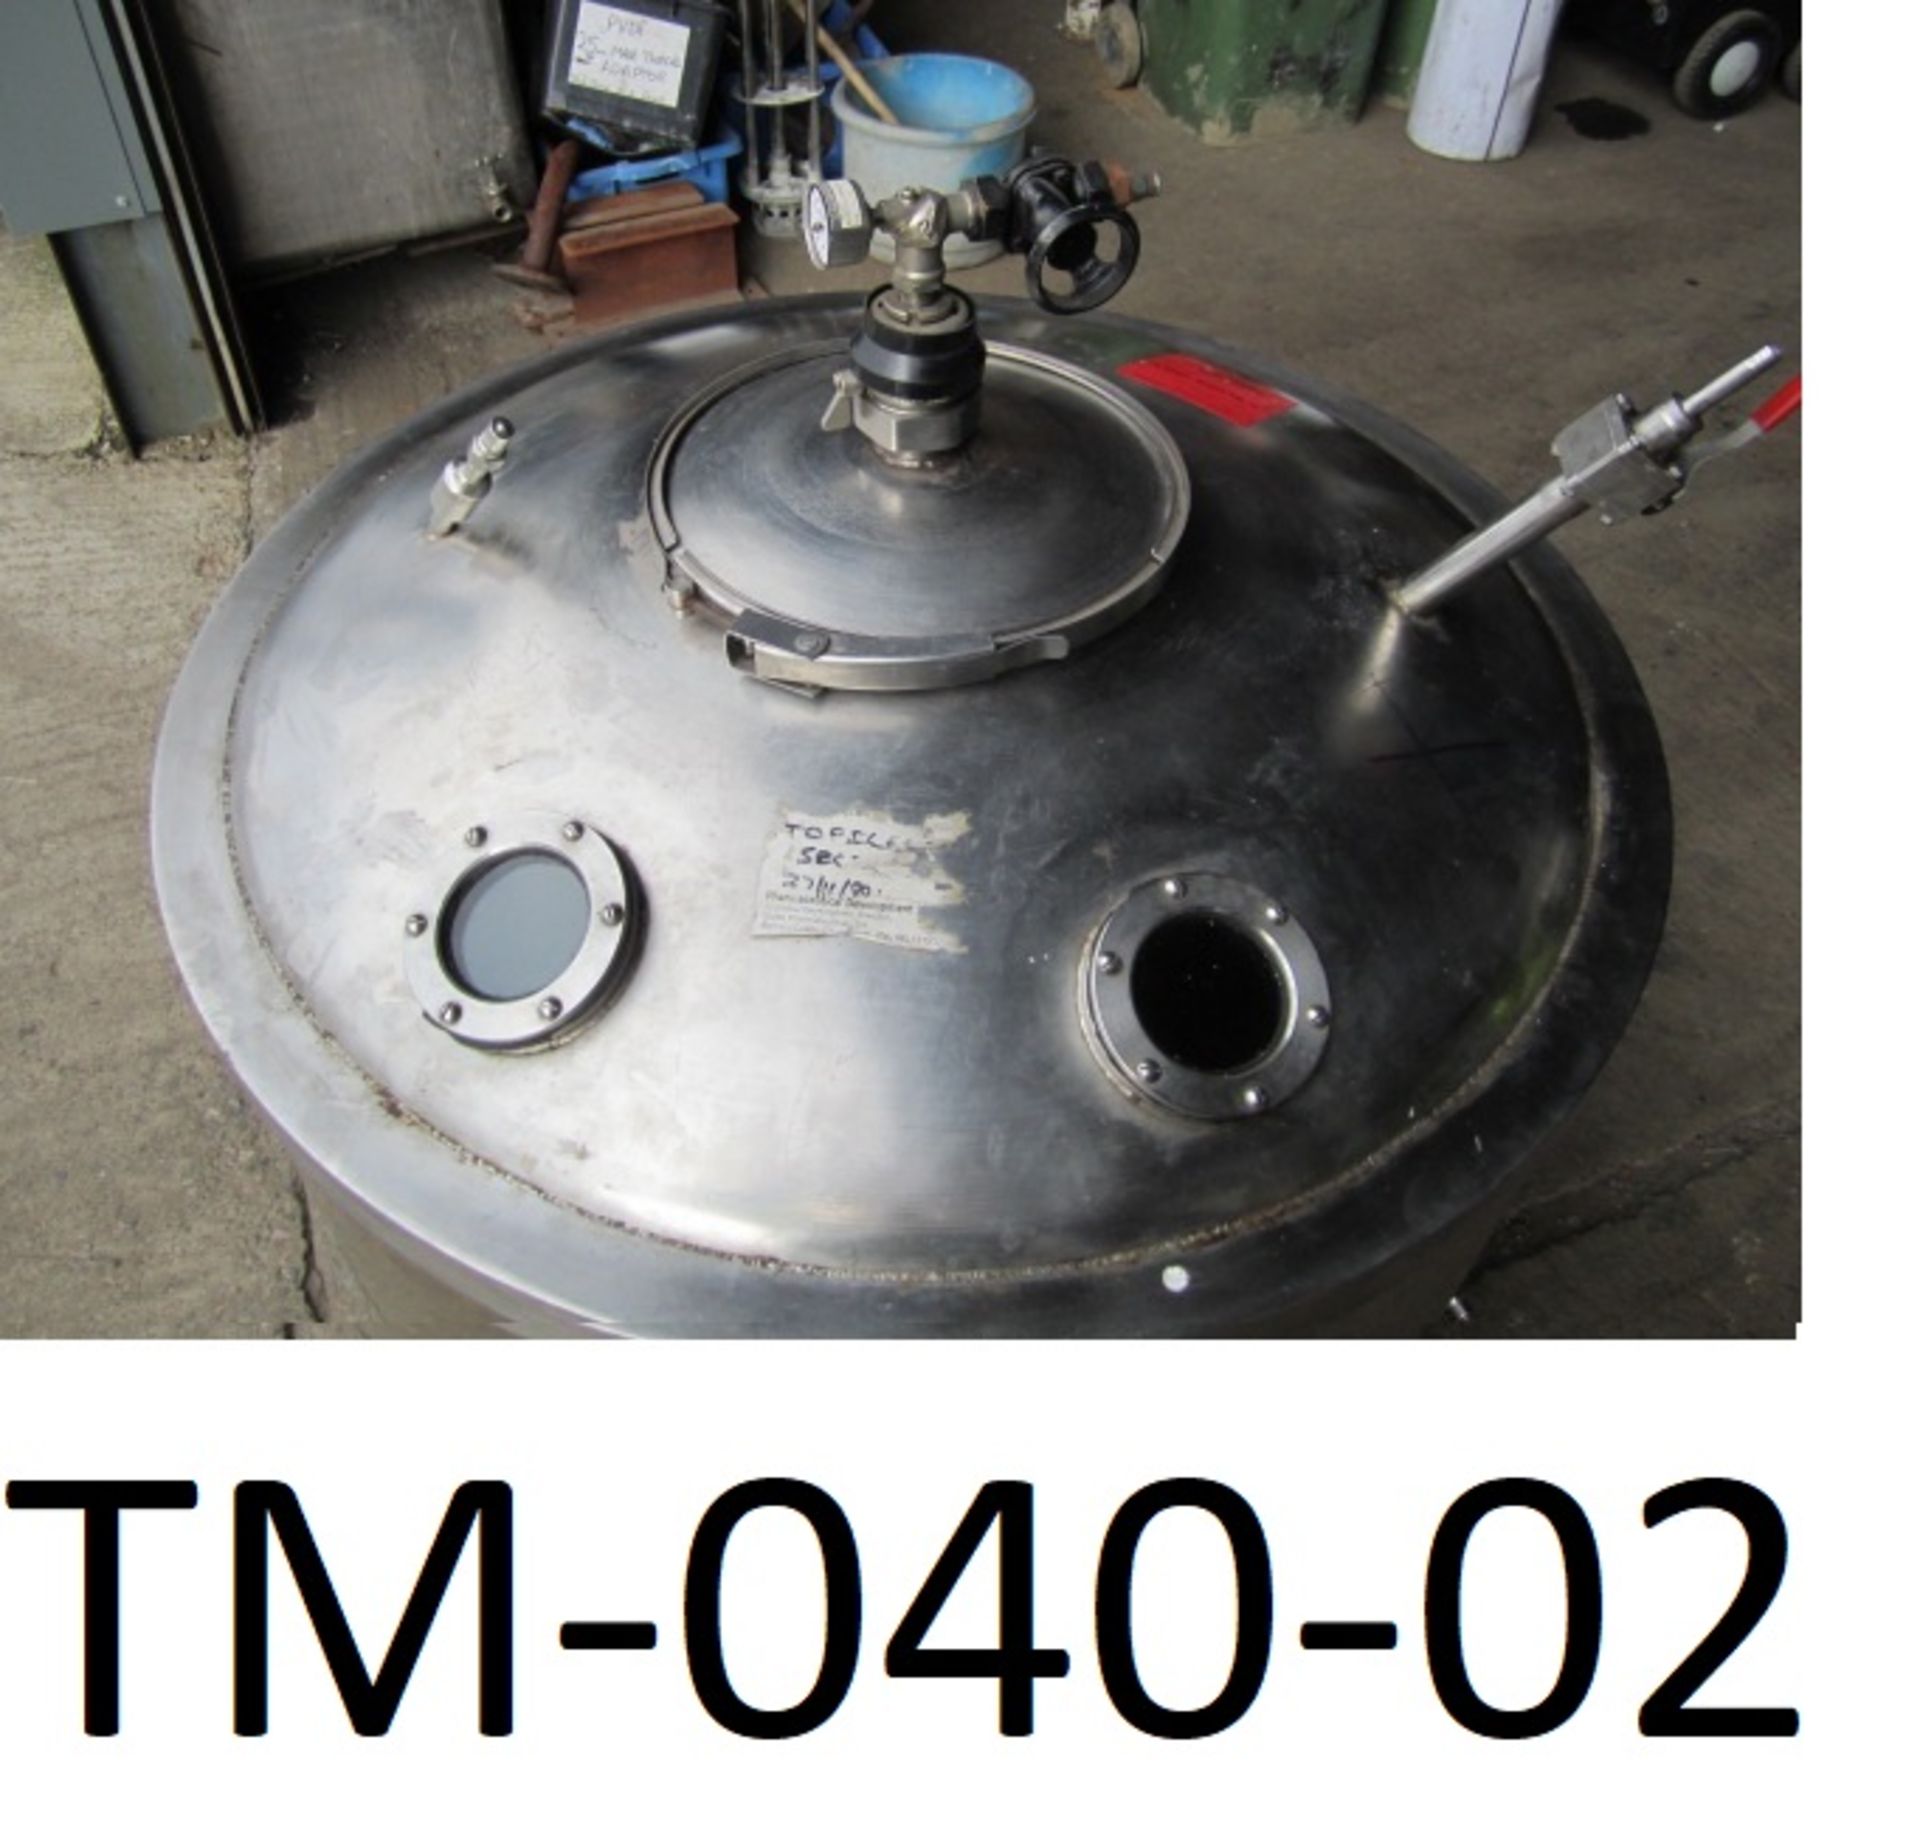 Grundy 250L Stainless Steel Pressure Vessel. with insulated cooling coils attached to the outside - Image 3 of 4